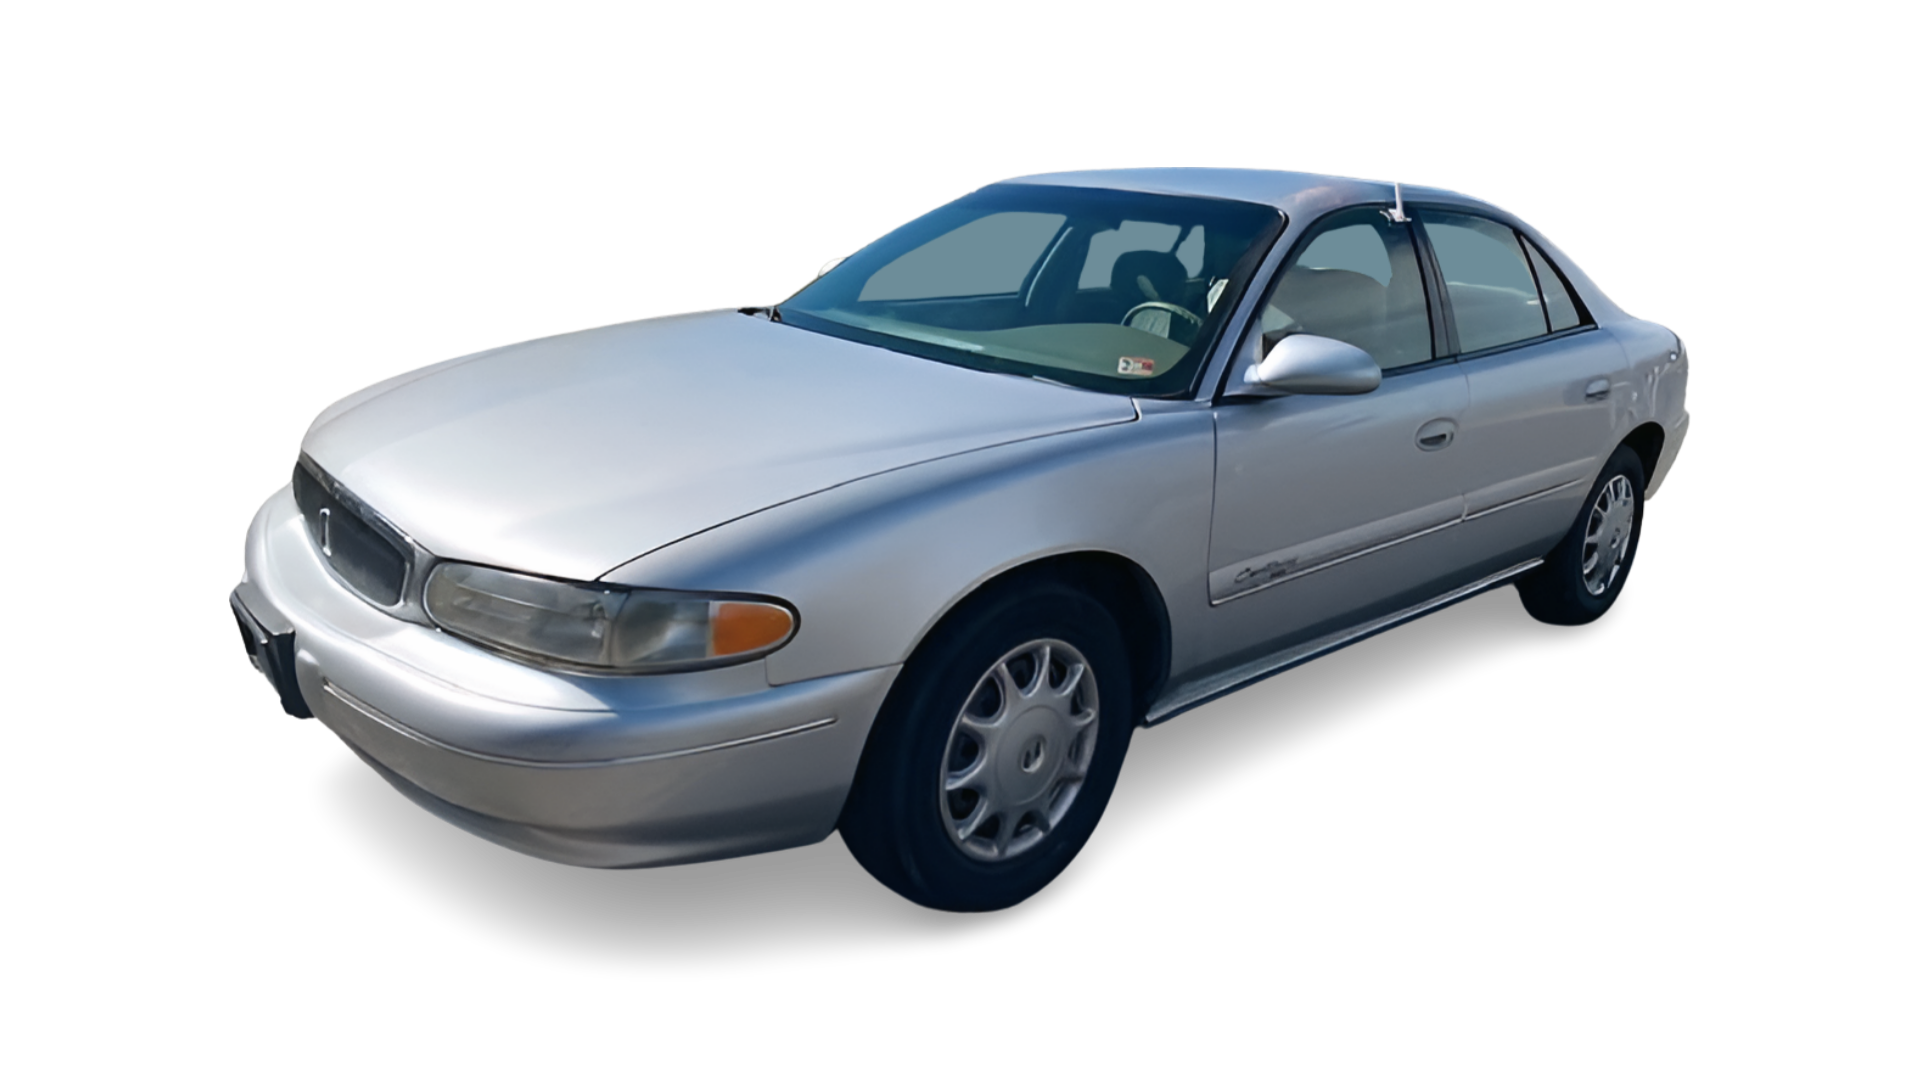 Used 2002 Buick Century's nationwide for sale - MotorCloud